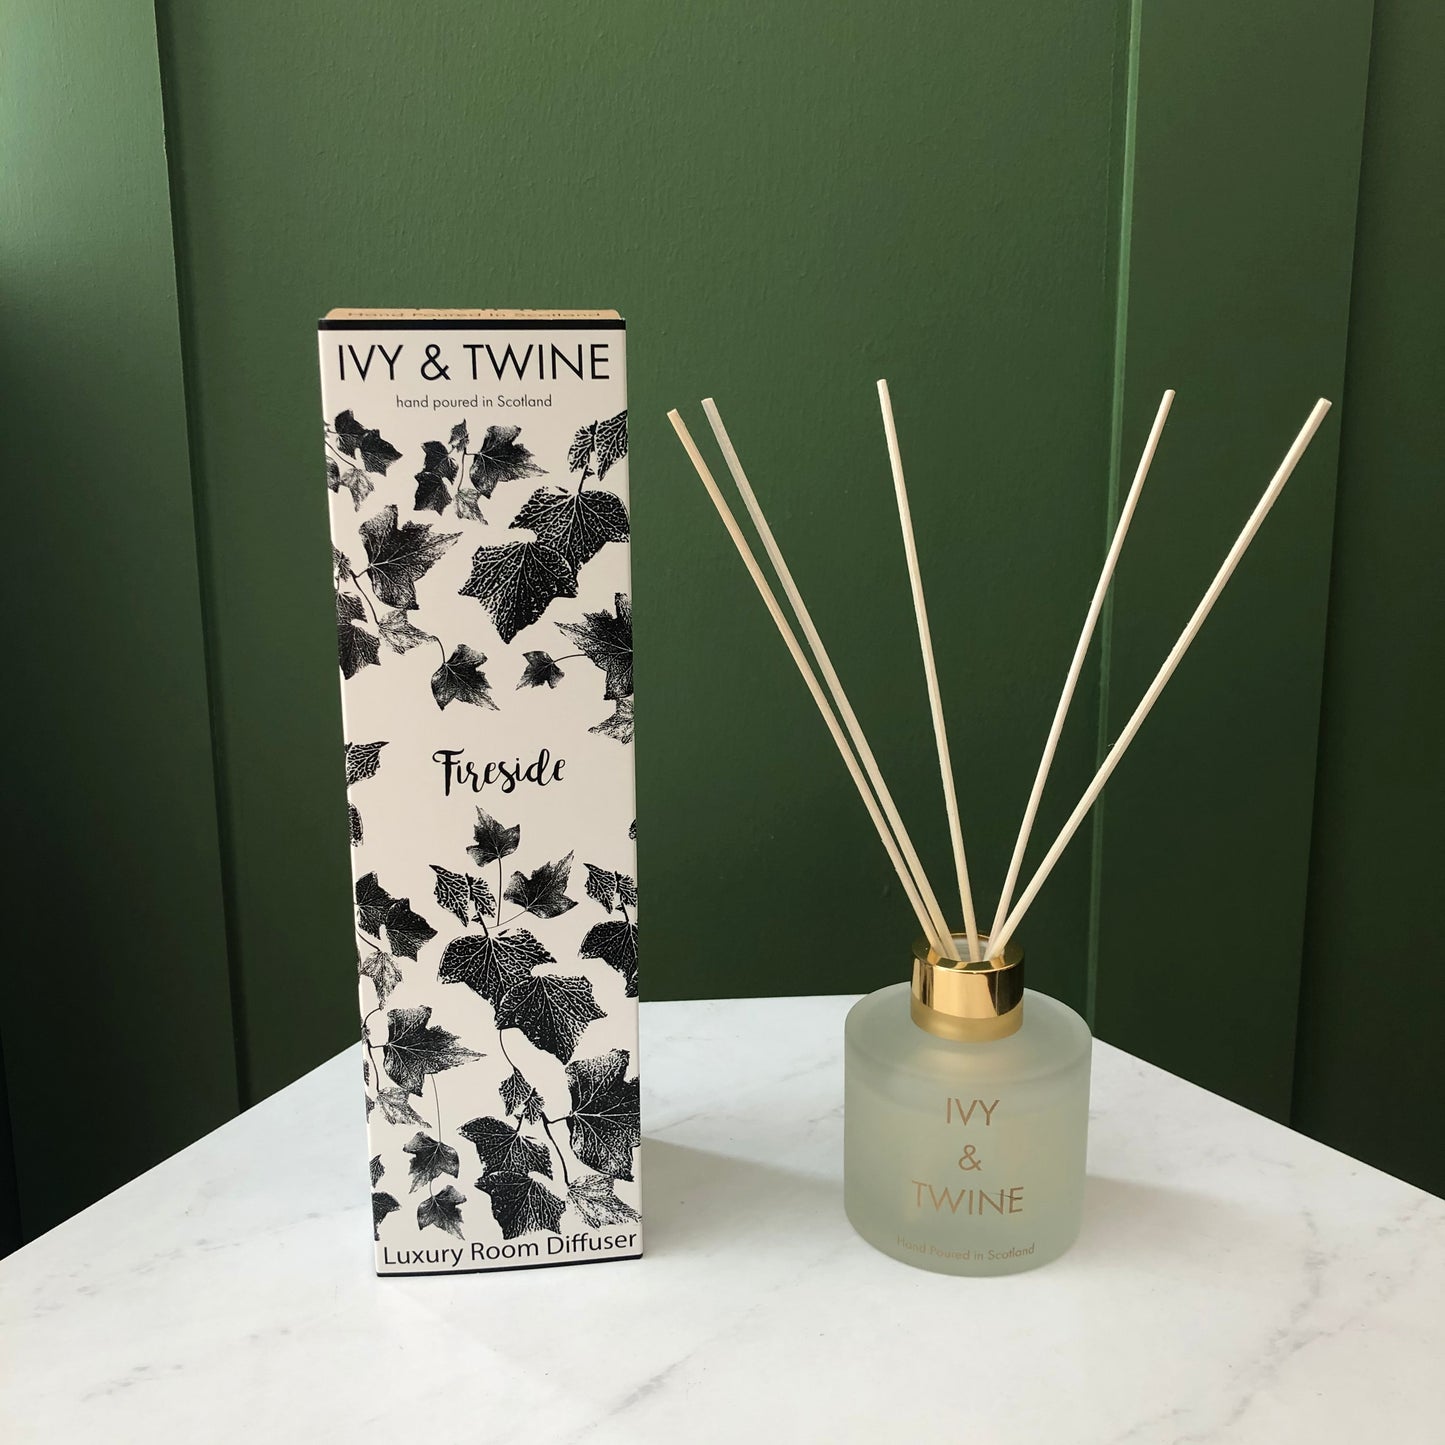 Fireside (100ml) Diffuser from Ivy and Twine